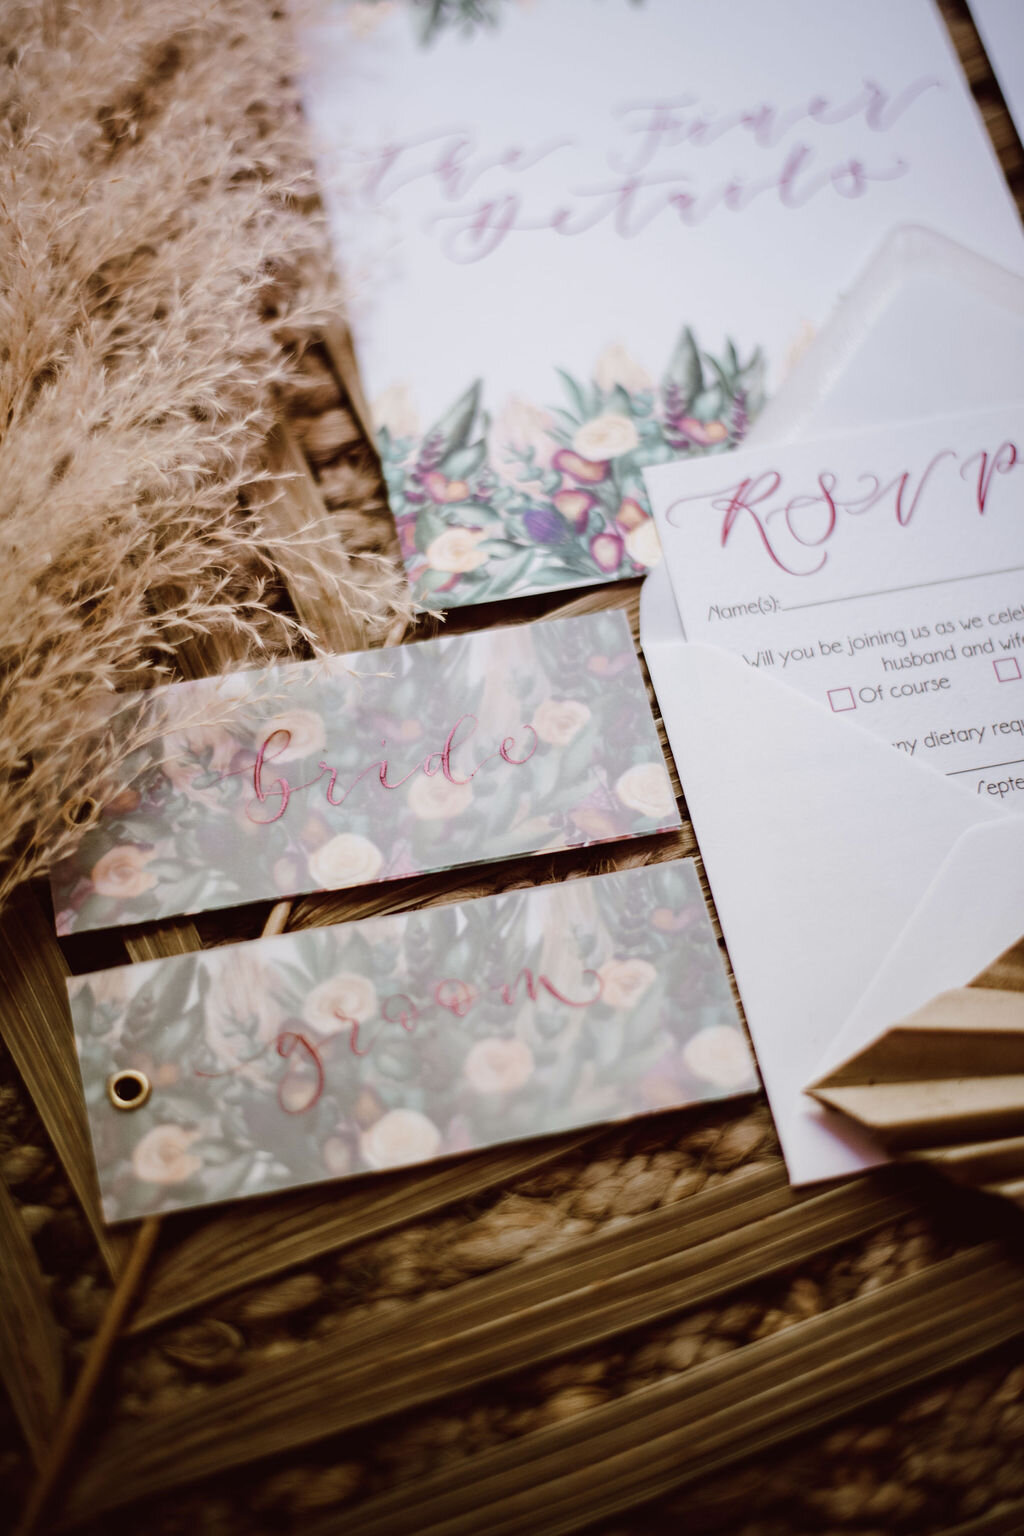 Burgundy calligraphy place cards  on vellum with watercolour painted pampass grass, roses, thistles  - Bride and groom.jpg